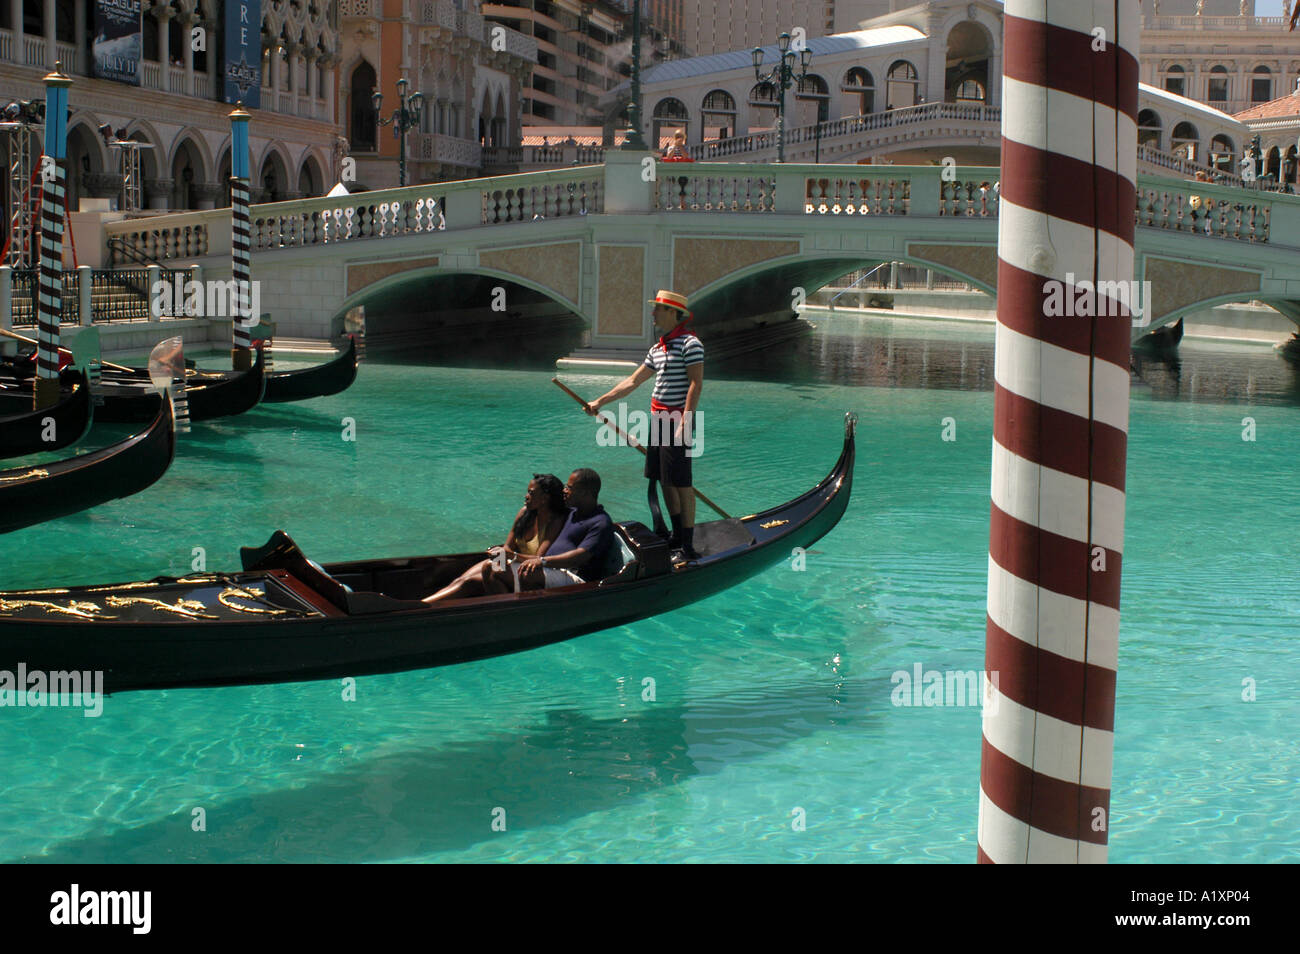 The Venetian hotel and casino one of the newest hotels on the Vegas strip. Las Vegas, Nevada, USA Stock Photo